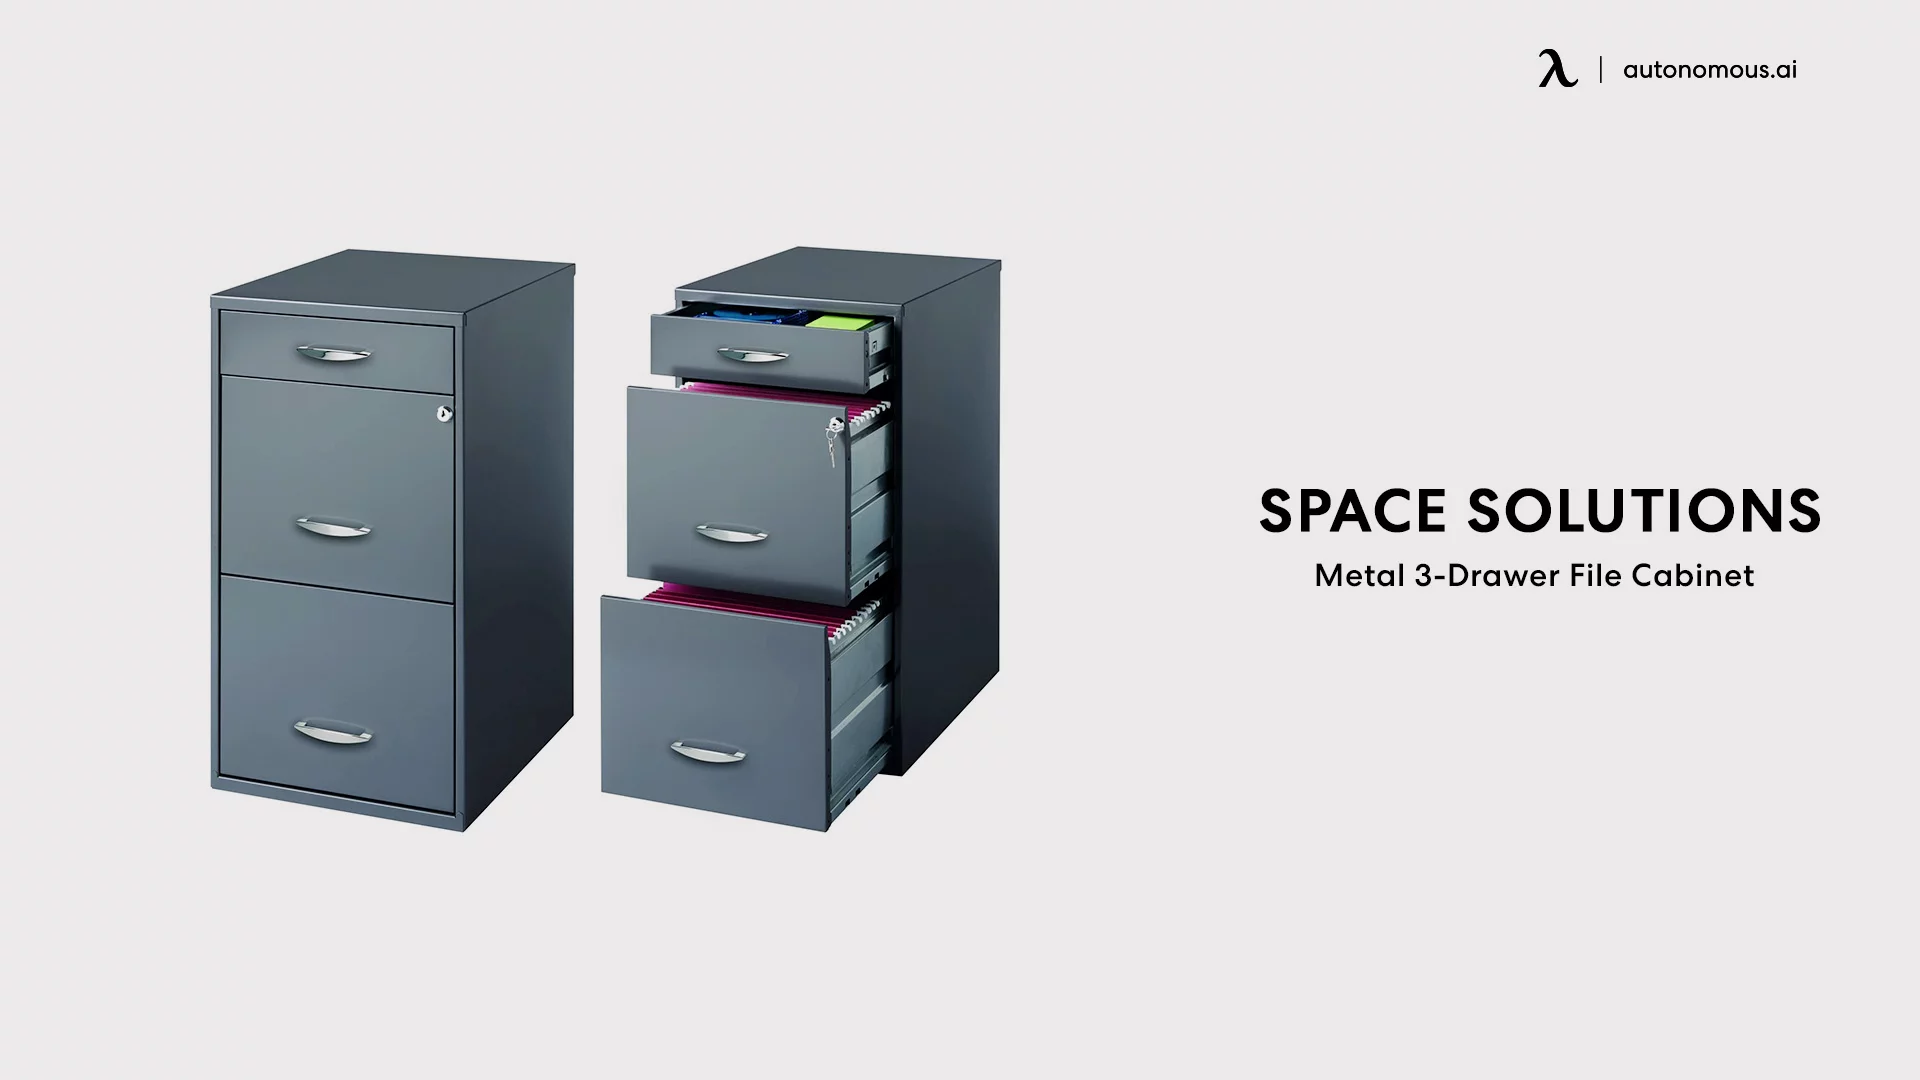 Metal 3-Drawer File Cabinet By Space Solutions